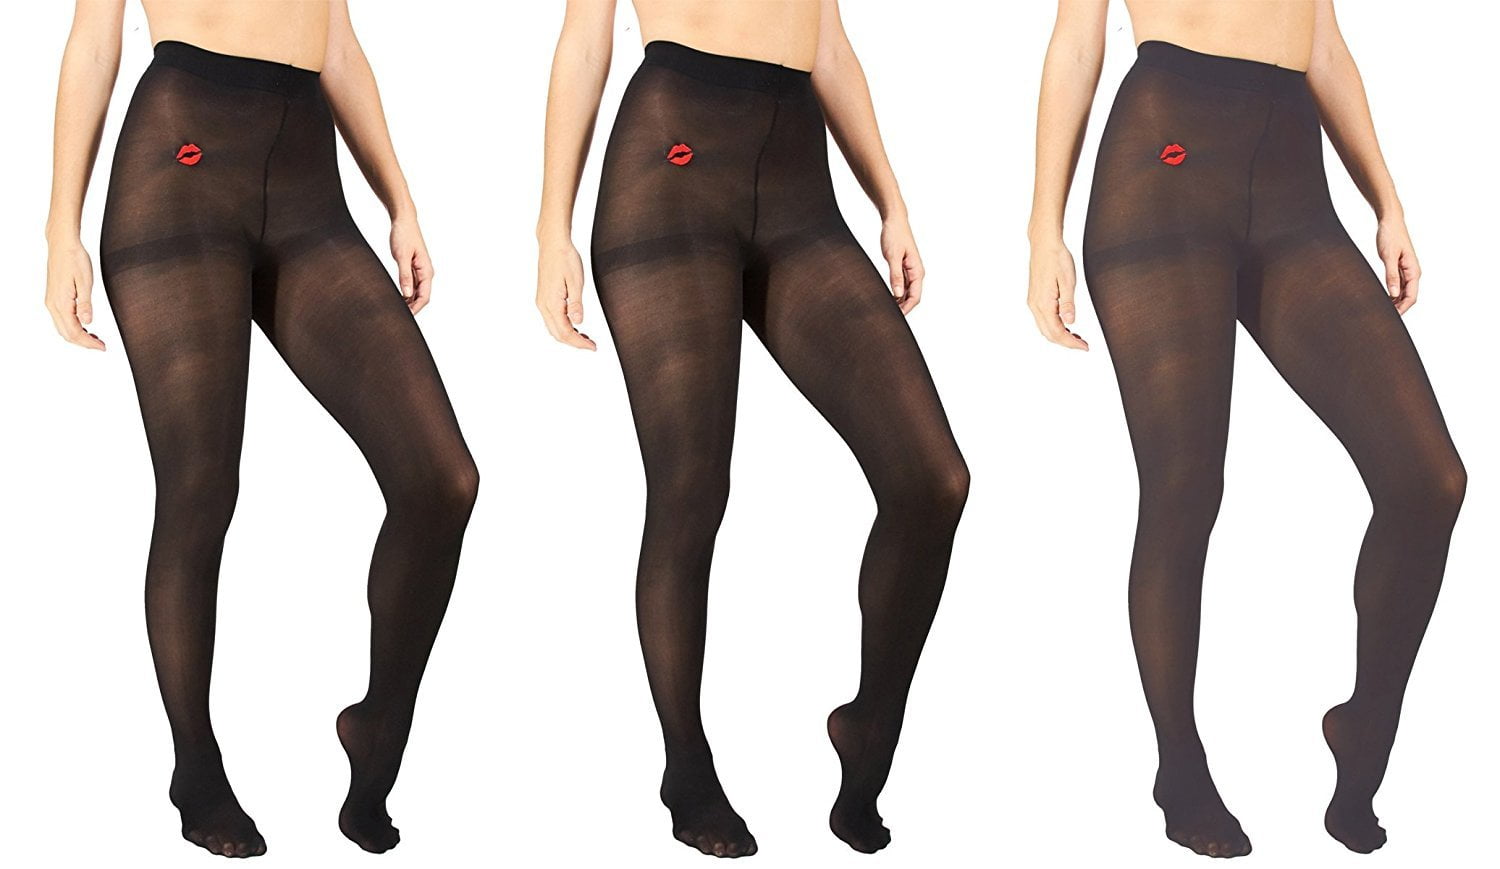 Marilyn Monroe Footed Breathable Opaque Tights, 3-Pack (Women's